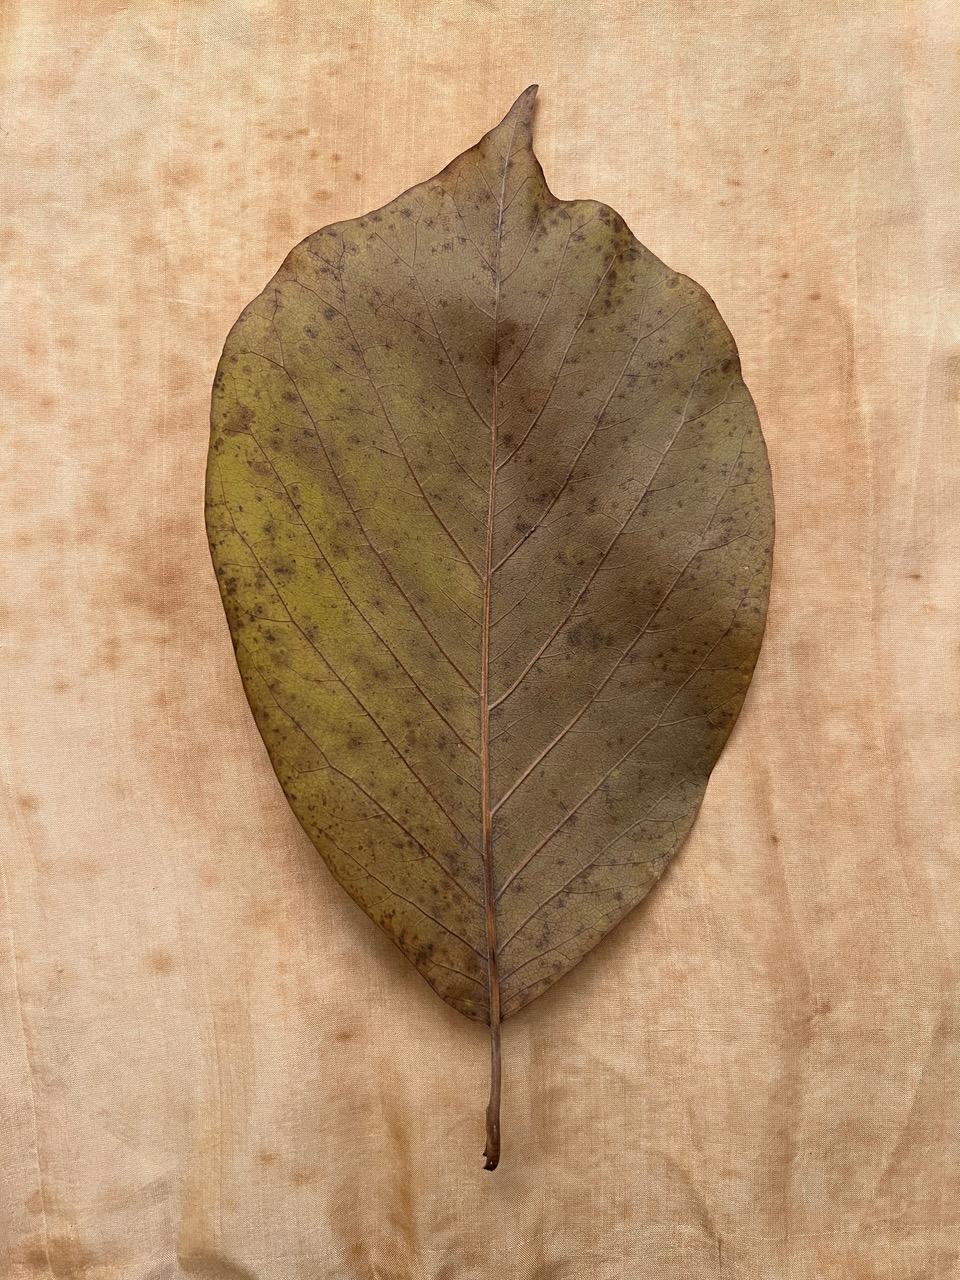 Nine Leaves: grid w/ nature still life leaf photographs in gold, red, green For Sale 5